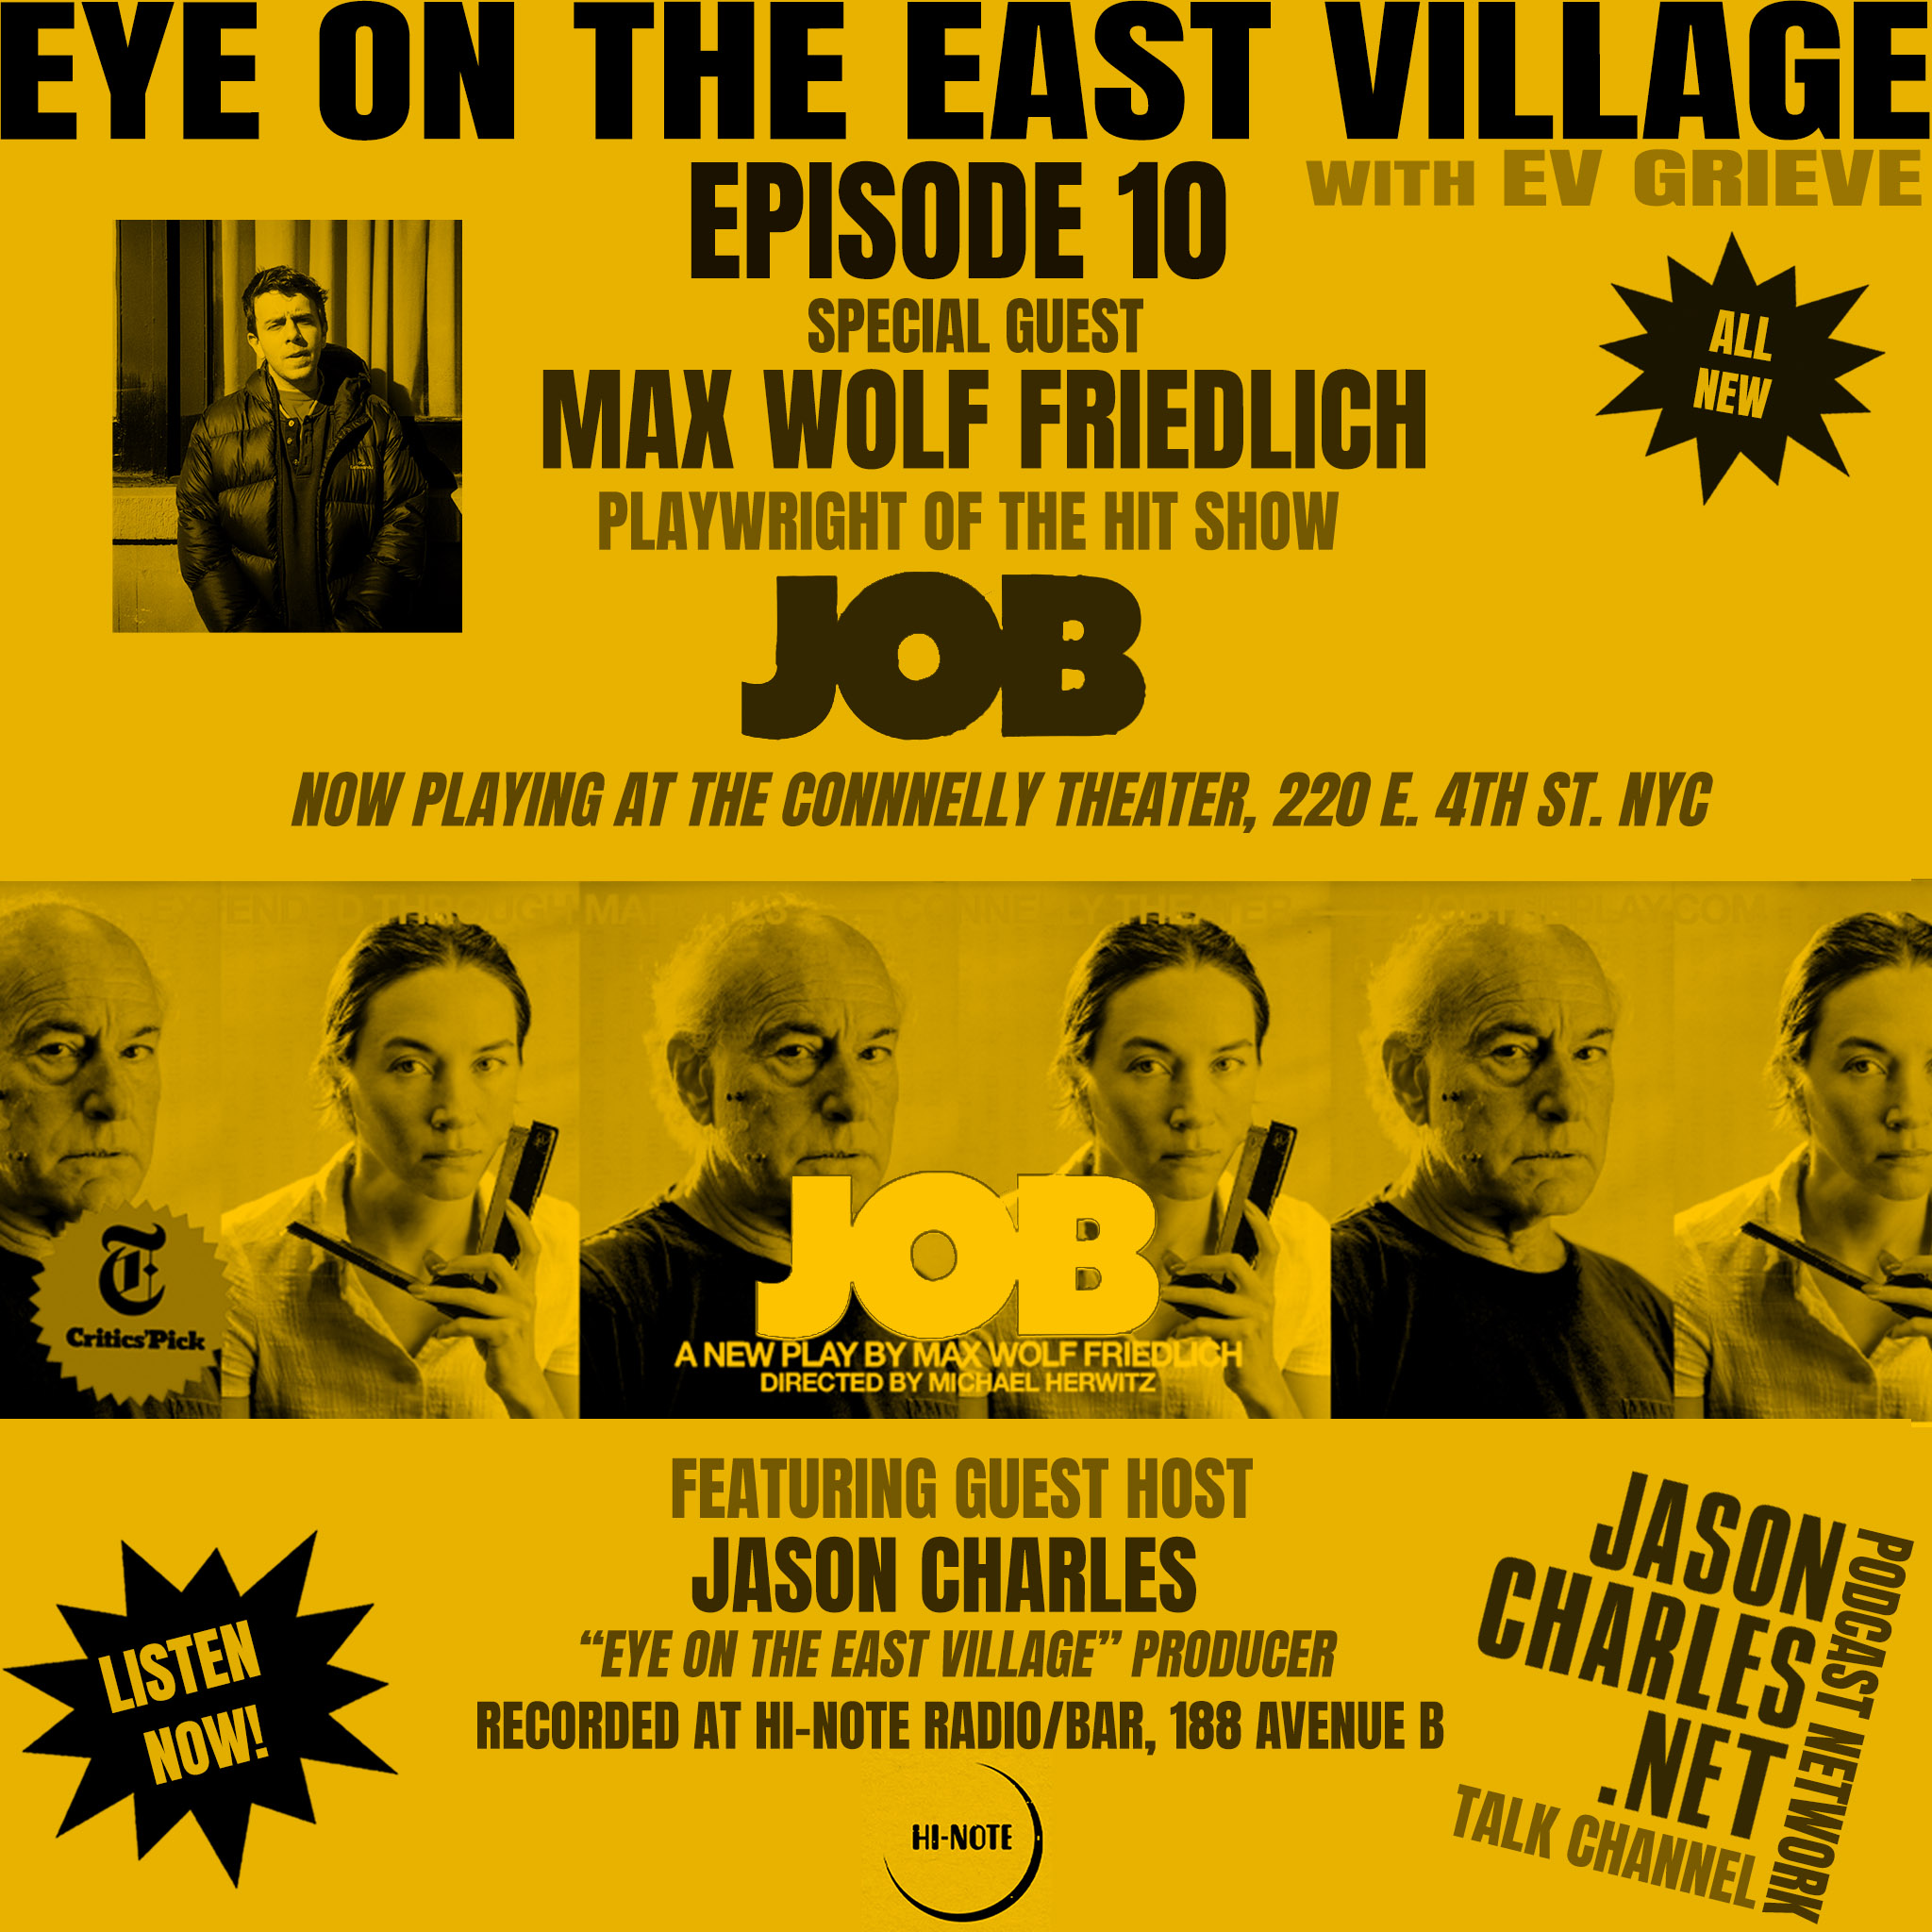 EYE ON THE EAST VILLAGE Episode 10 "JOB" Playwright Max Wolf Friedlich